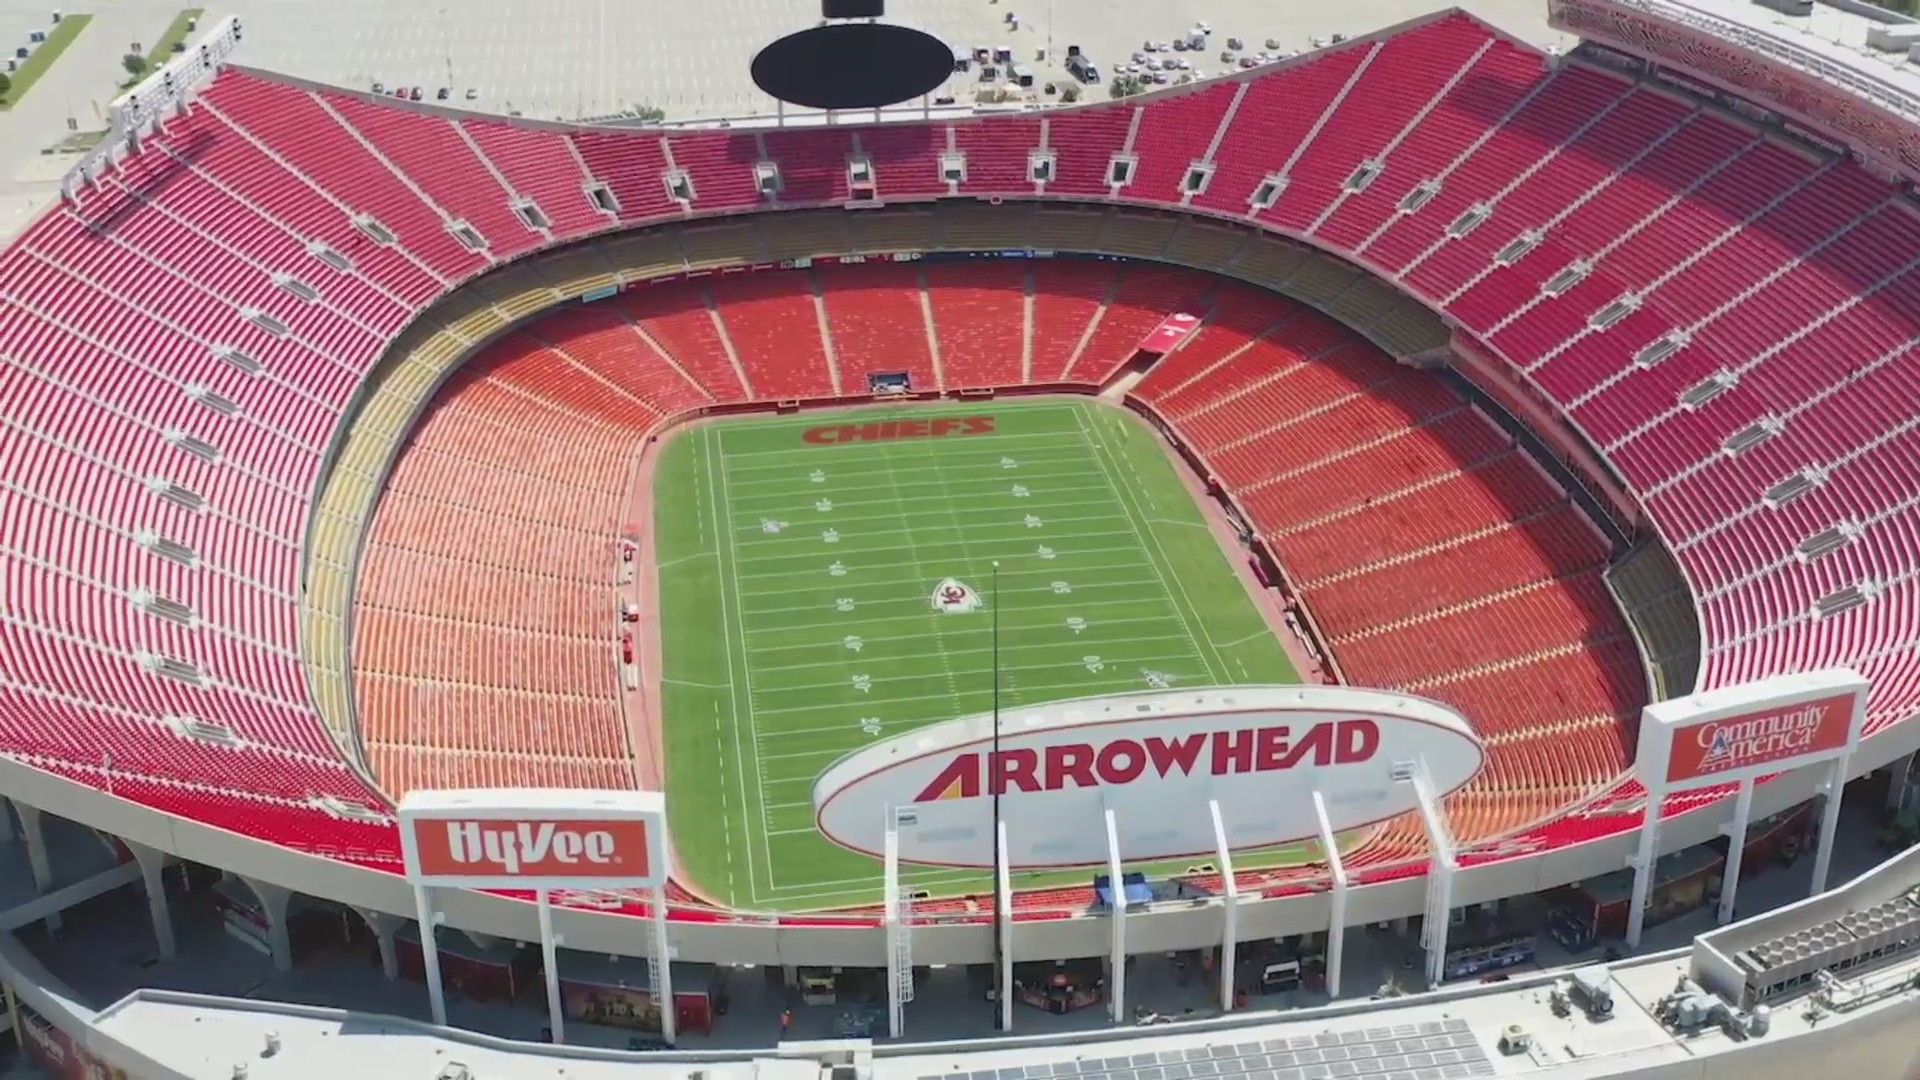 Get in the game': Arrowhead Stadium gets ready to welcome thousands of voters on Election Day